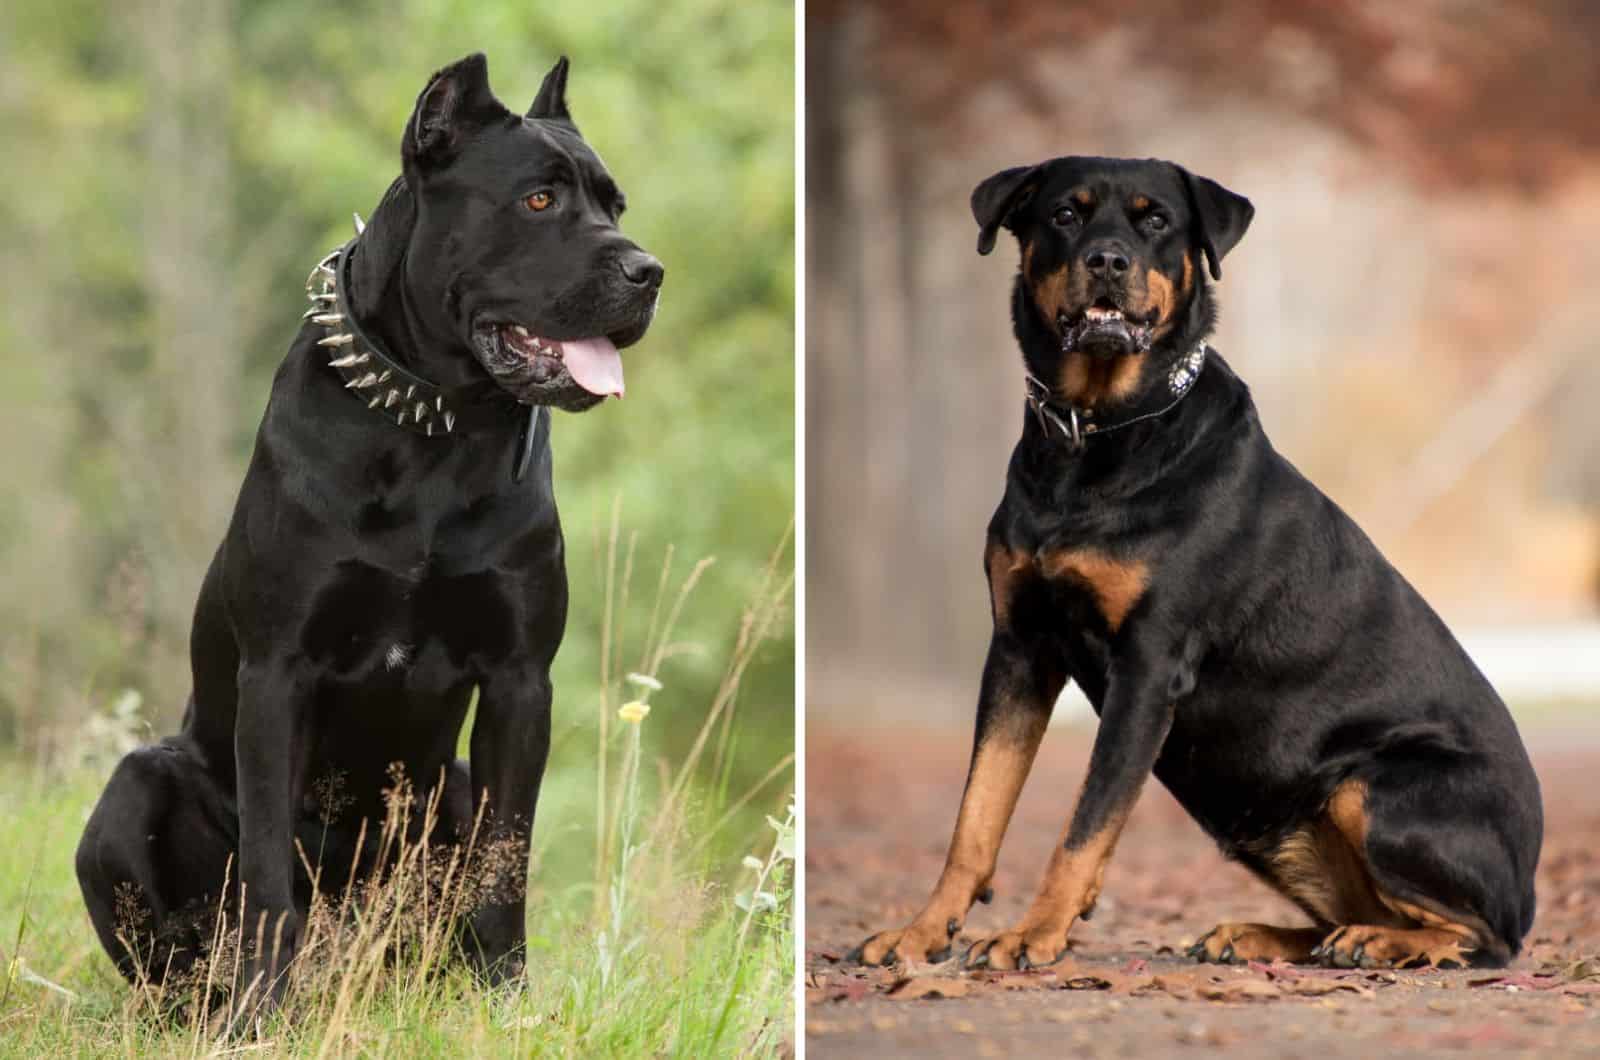 cane corso and rottweiler sitting